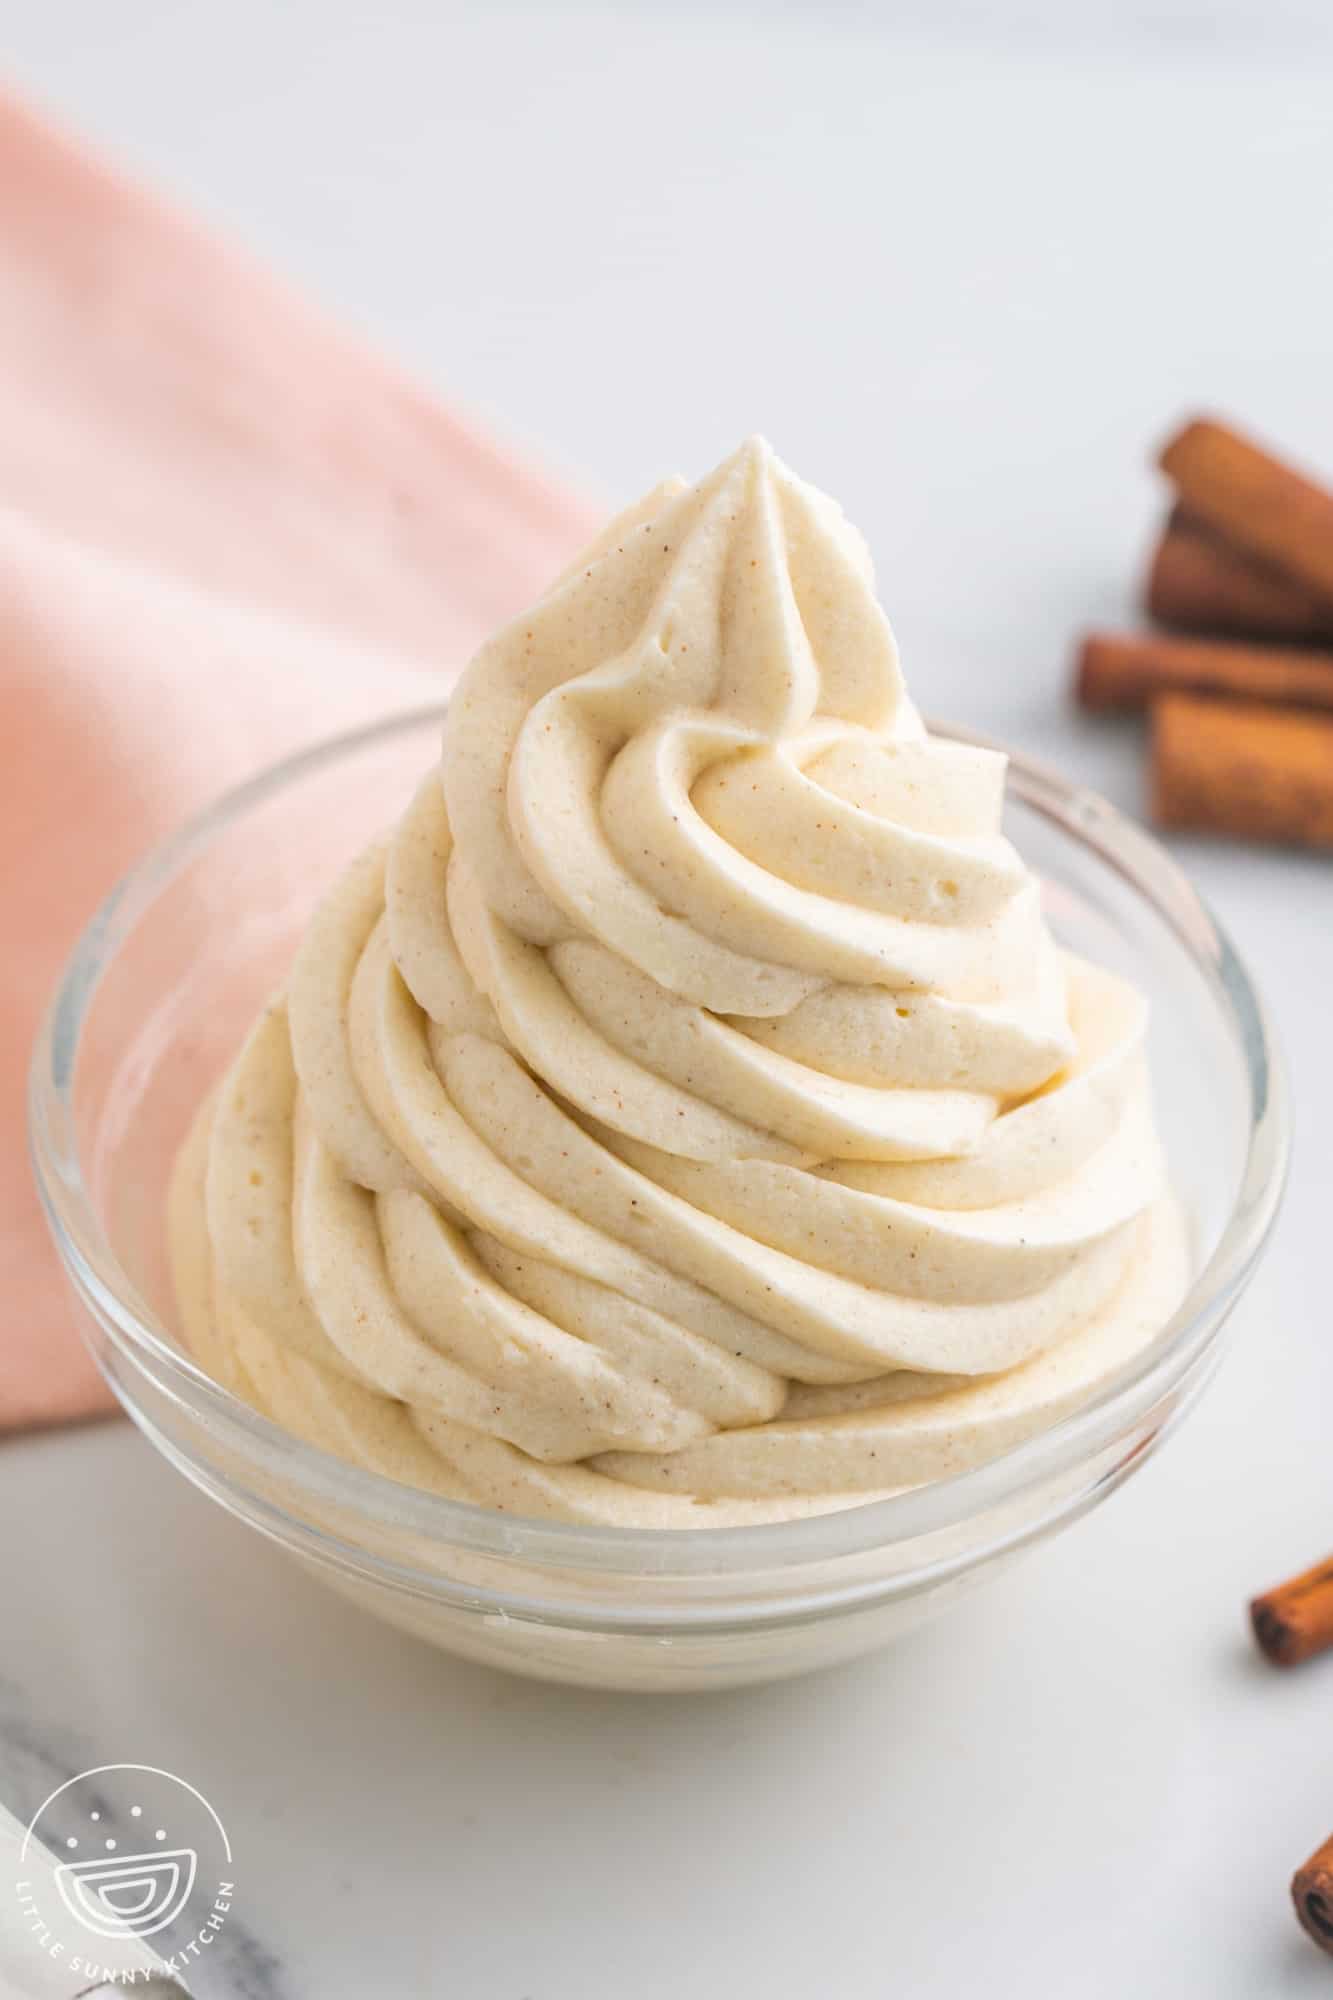 Piped cinnamon cream cheese frosting in a small bowl